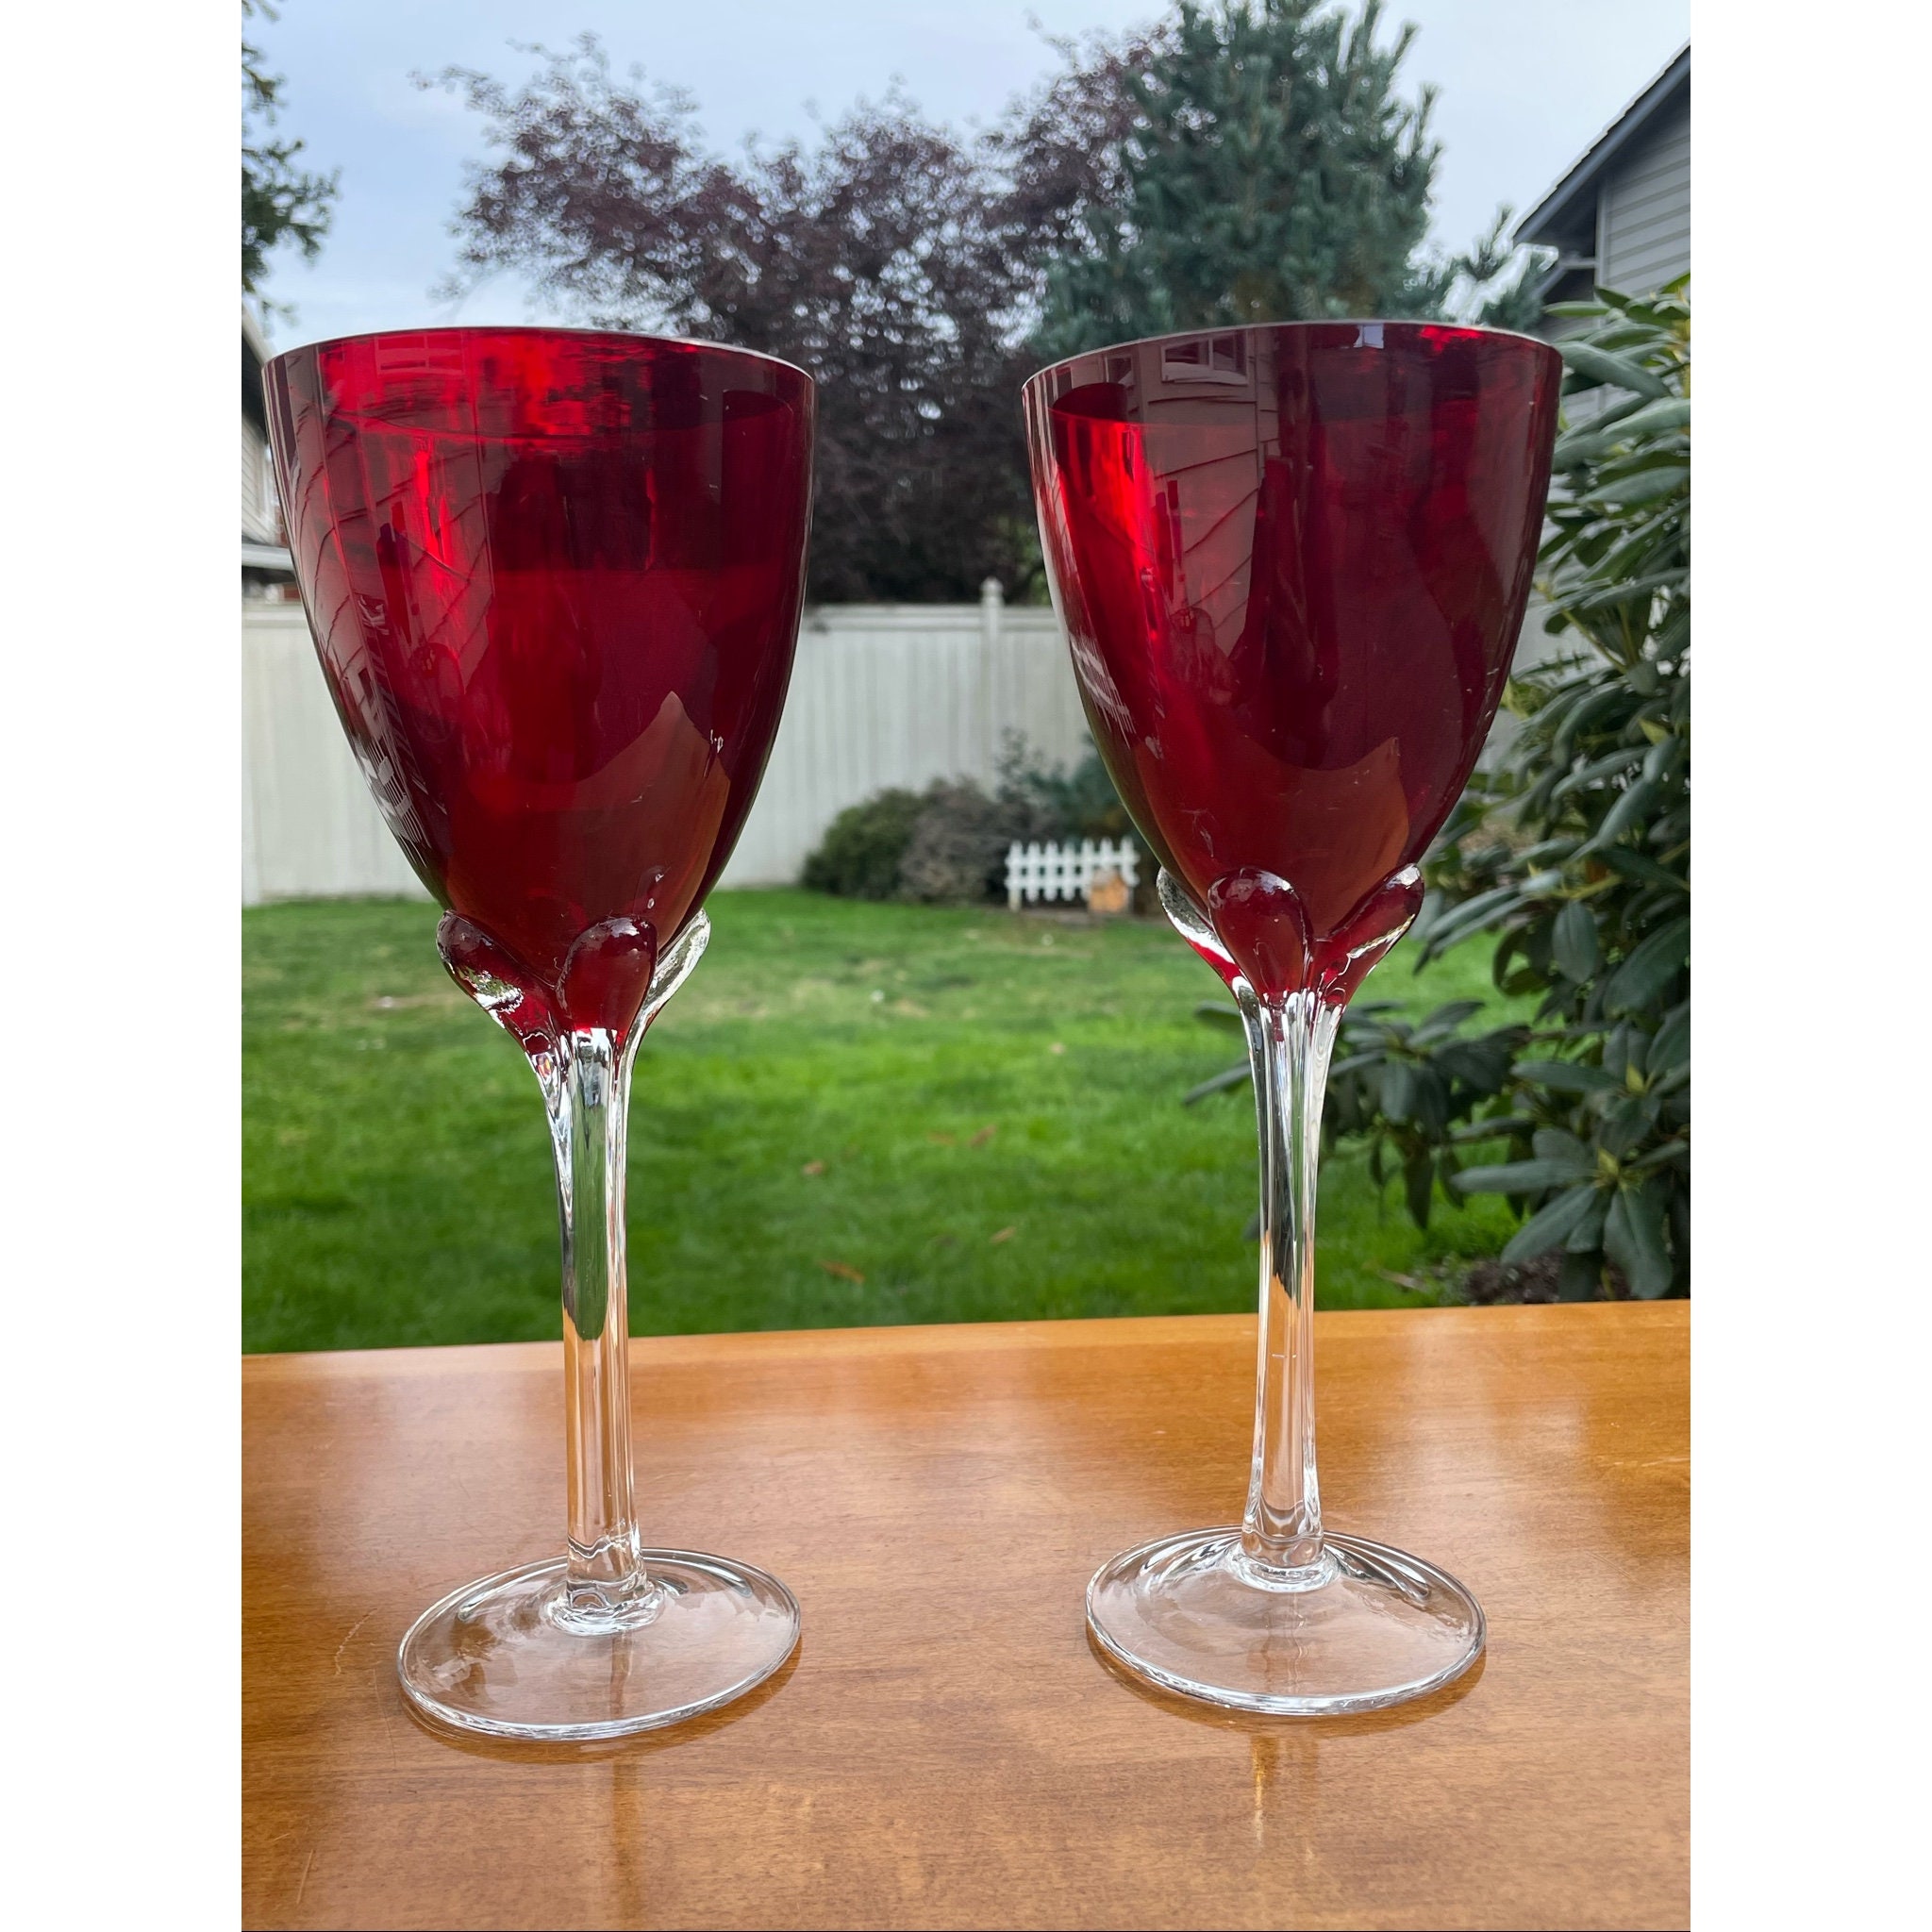 Ruby Red Fluted / Ribbed Wine Glasses With Clear Stem Set of 4 -  Israel